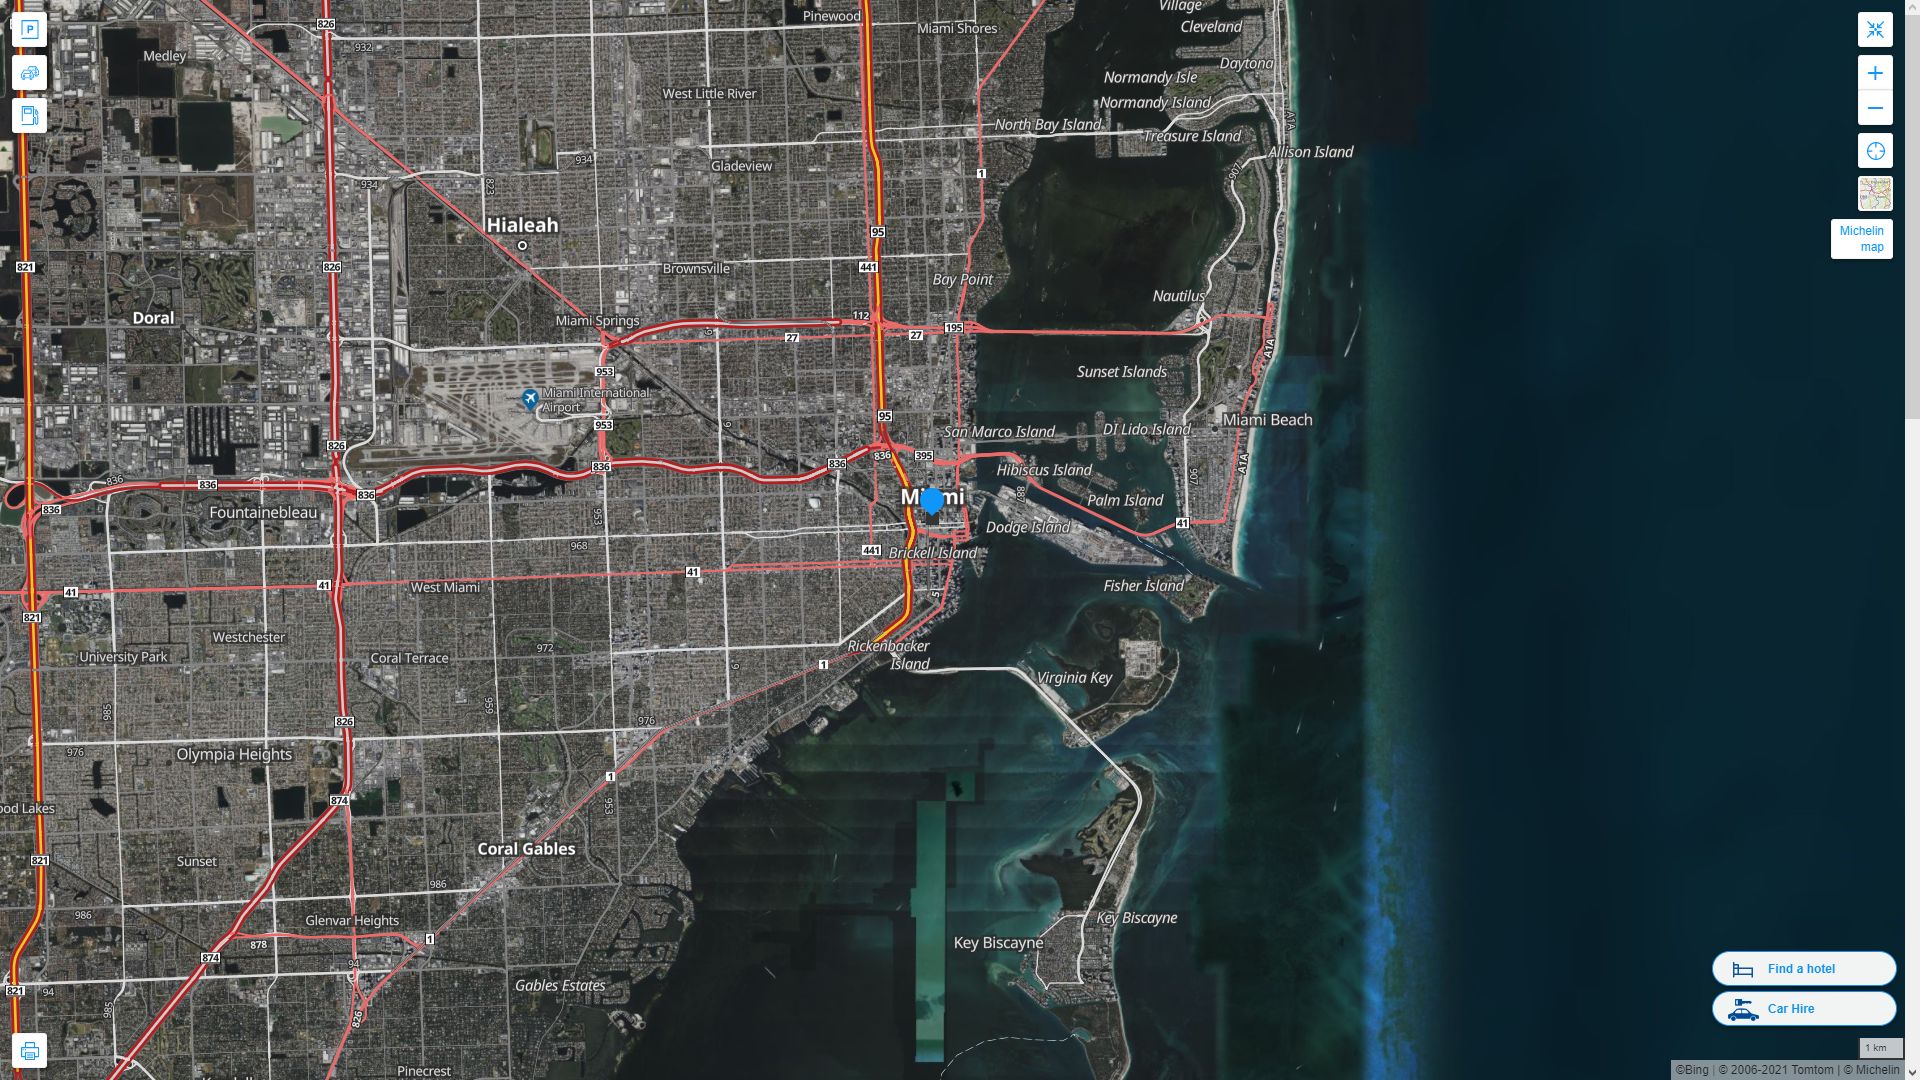 Miami Florida Highway and Road Map with Satellite View